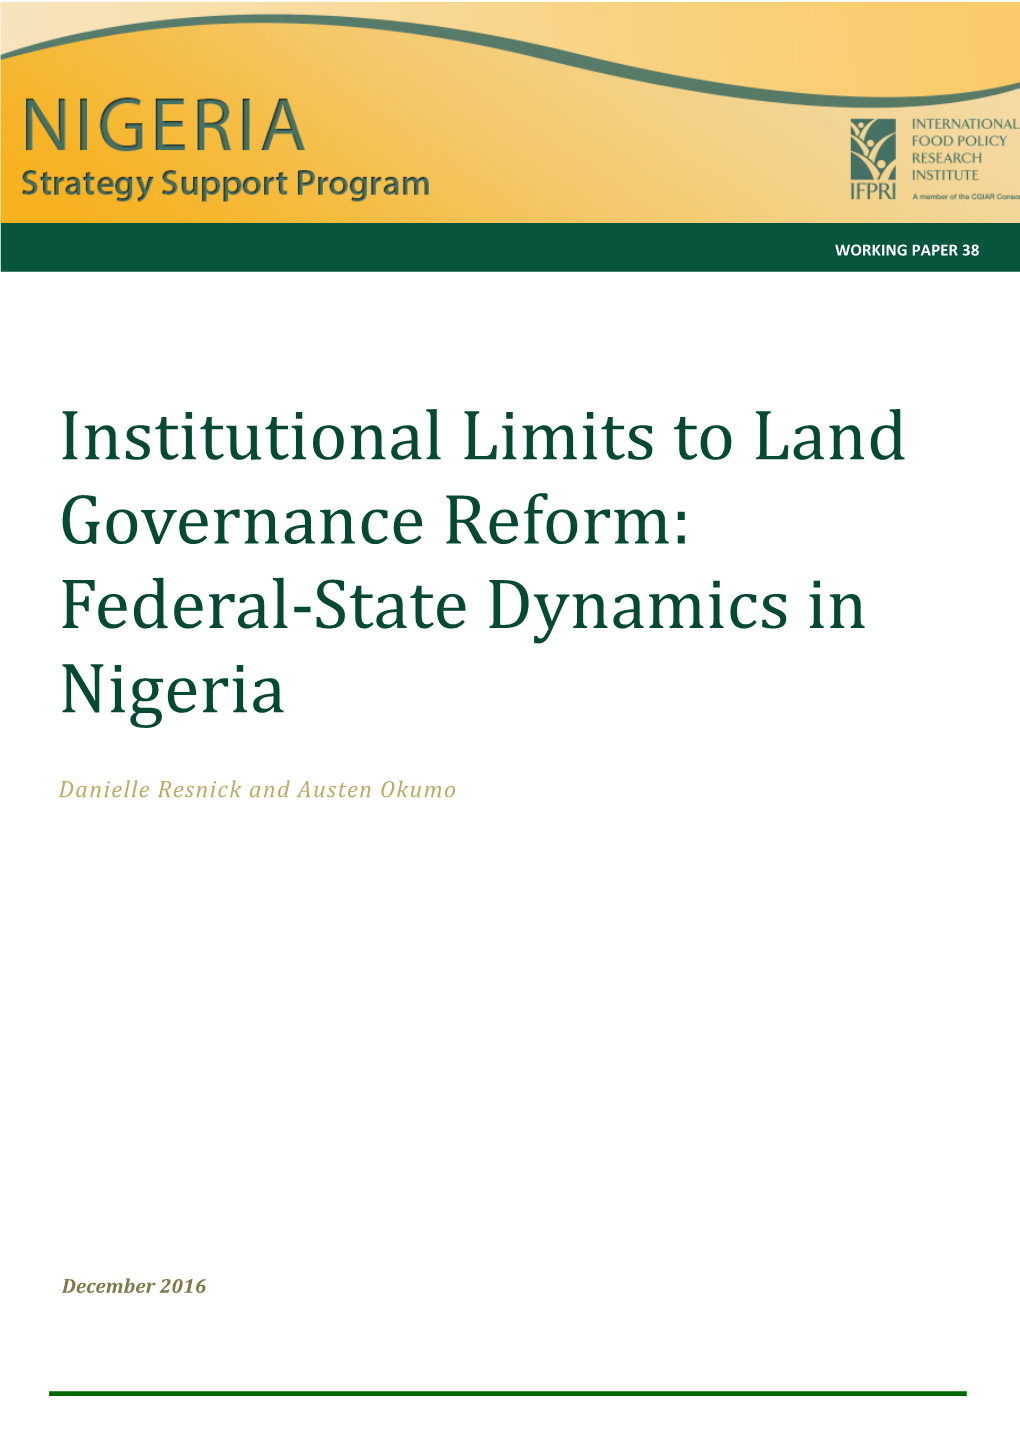 Institutional Limits to Land Governance Reform: Federal-State Dynamics in Nigeria